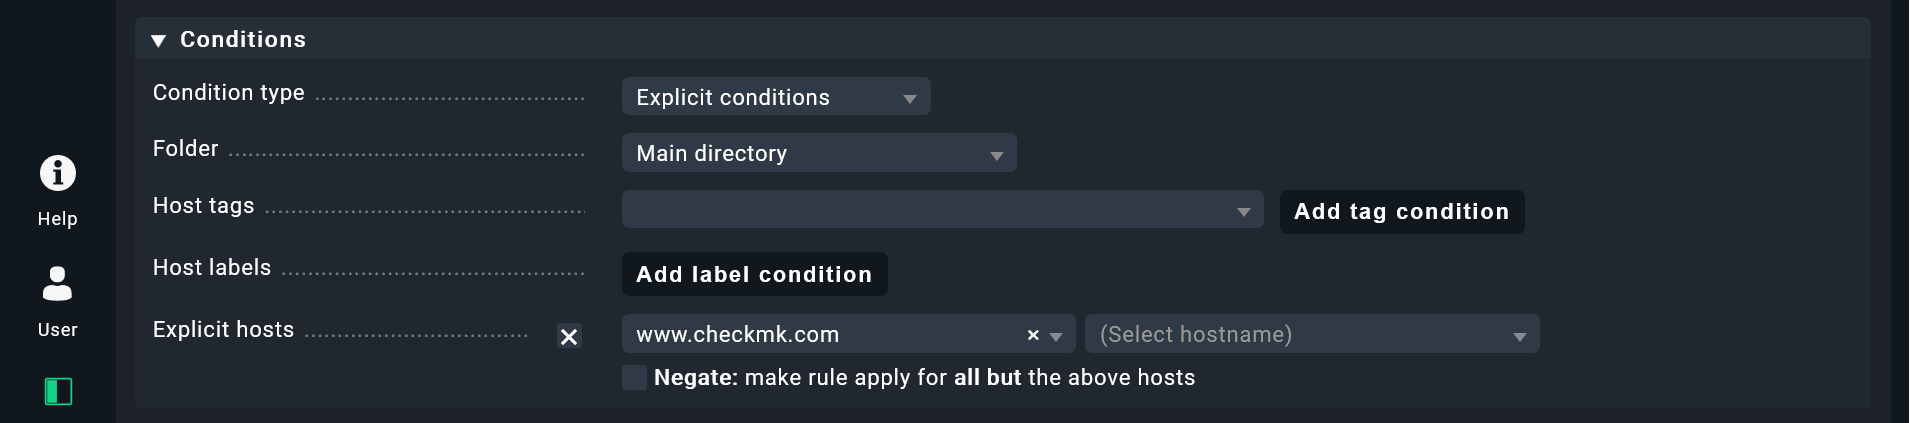 Using the option to tie a rule to an explicit host in Checkmk